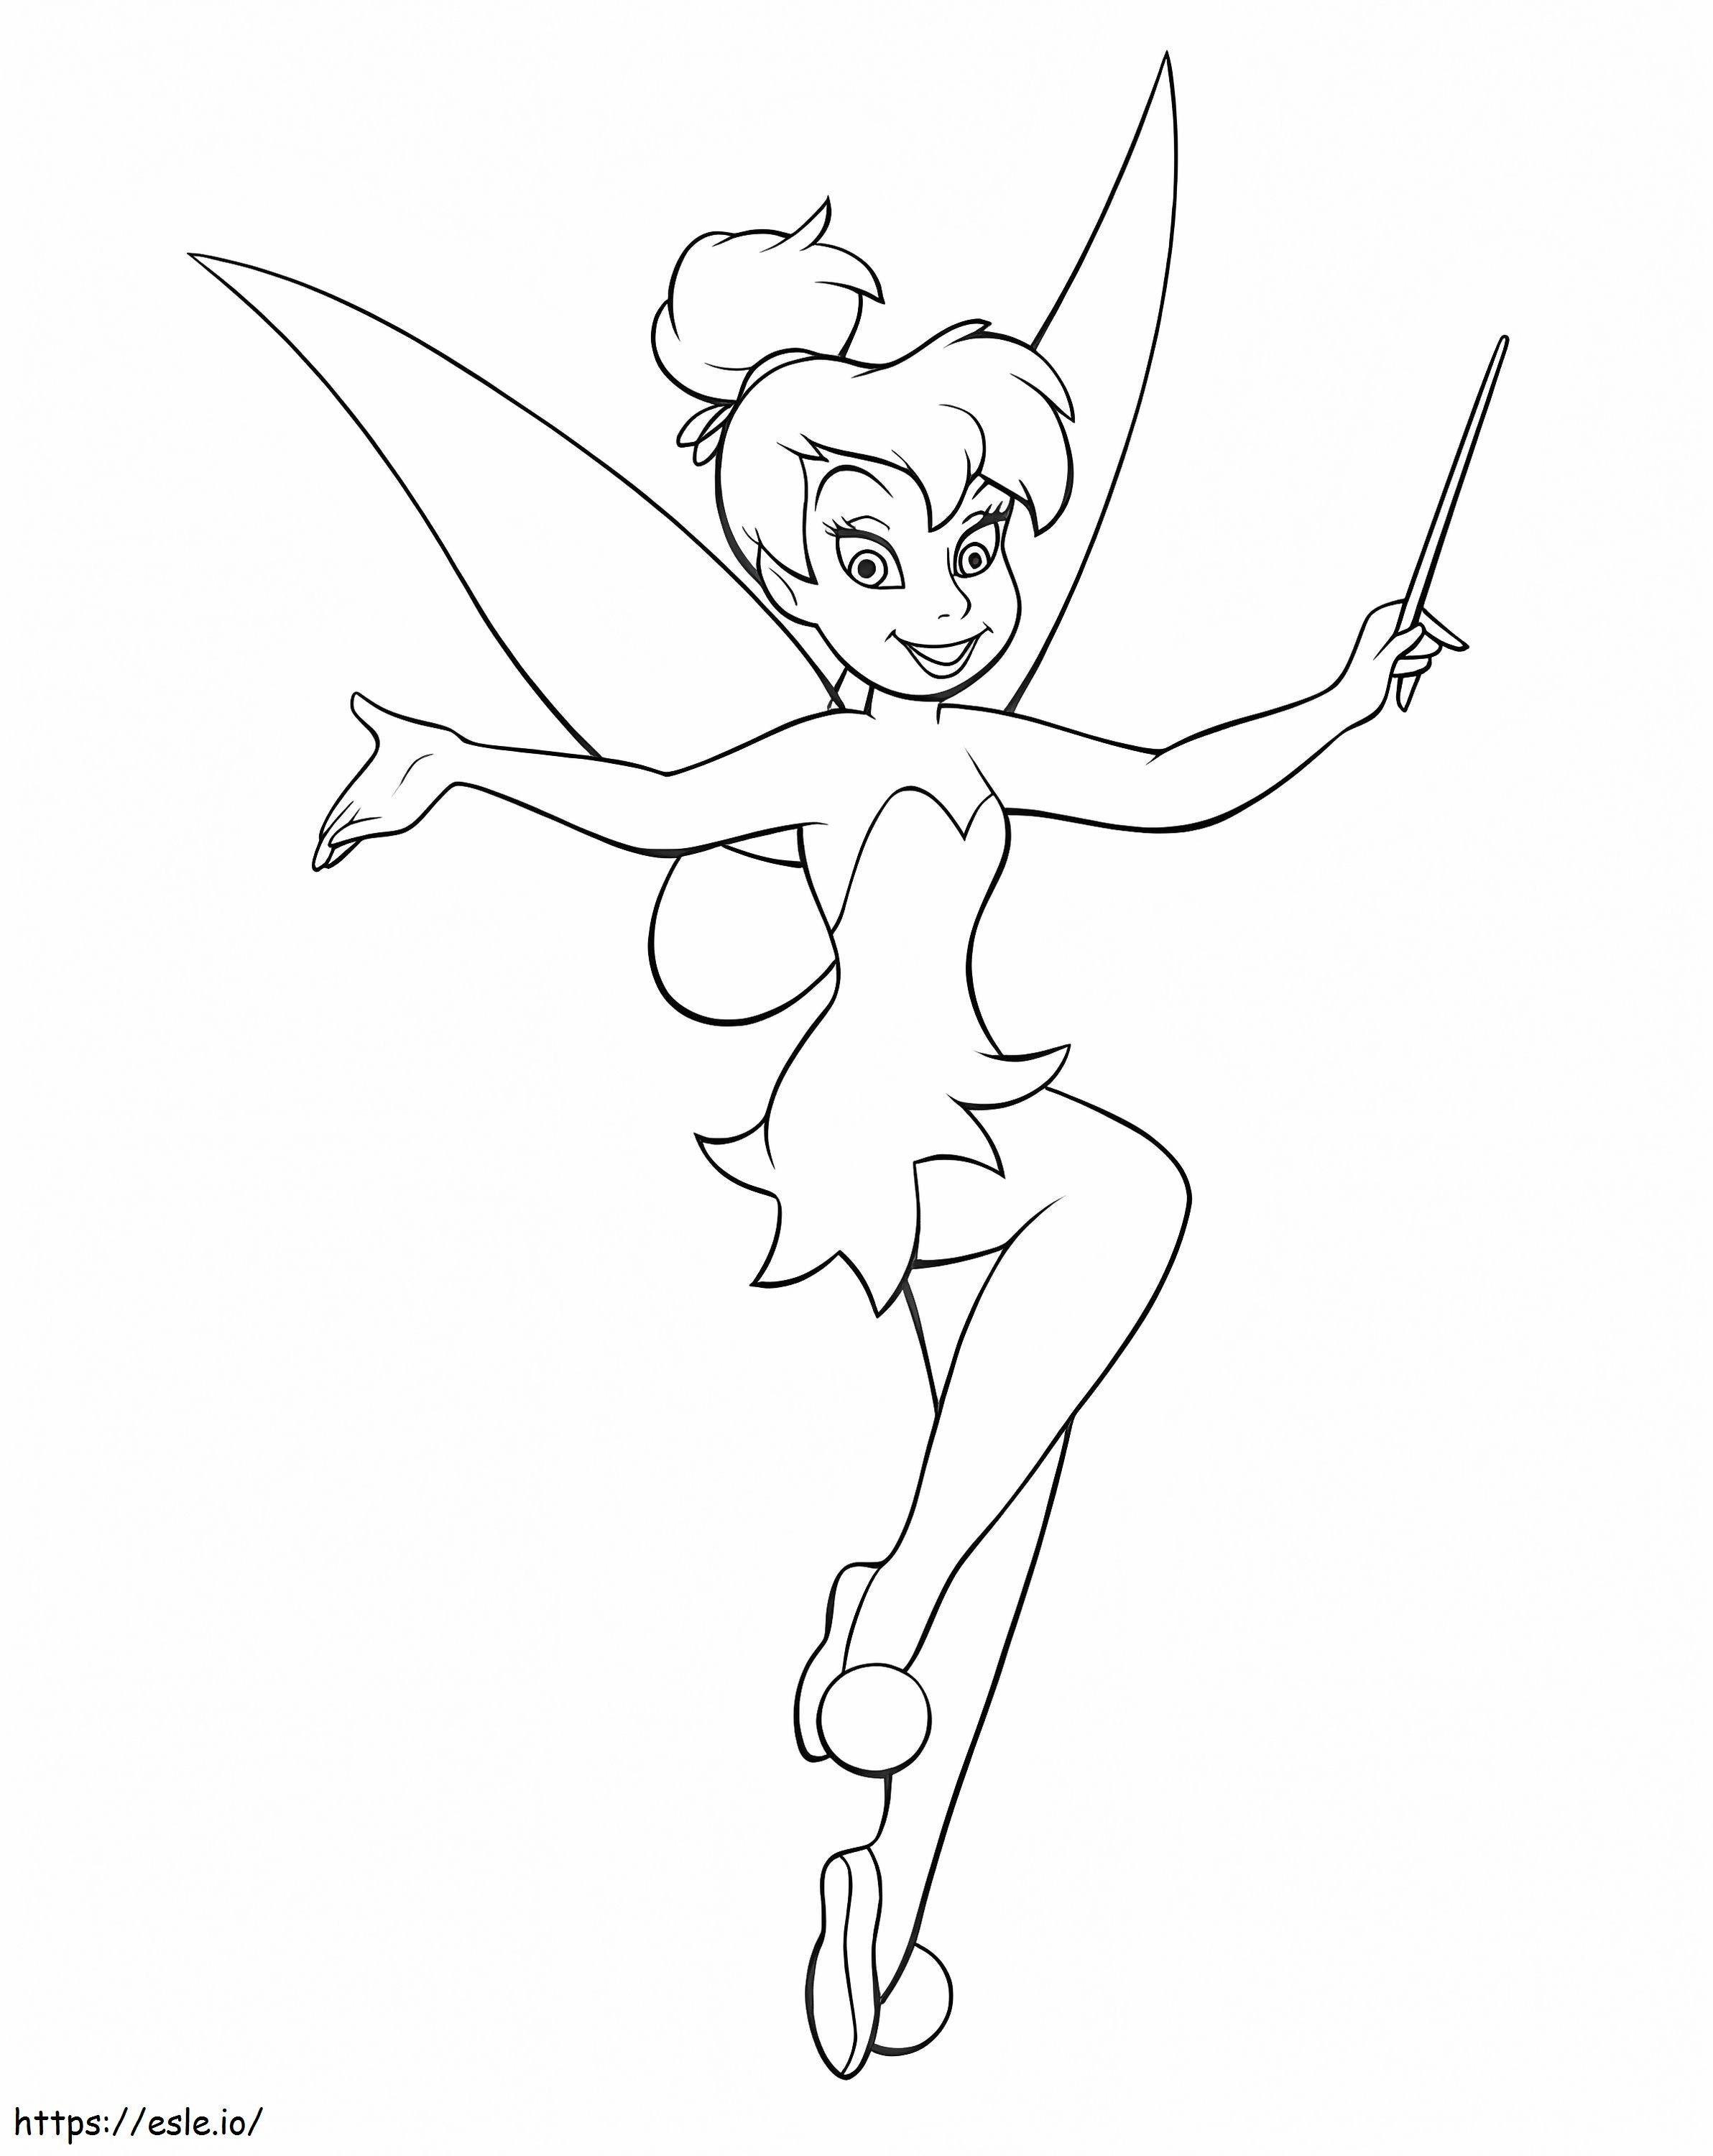 Tinkerbell Holding A Magic Wand coloring page